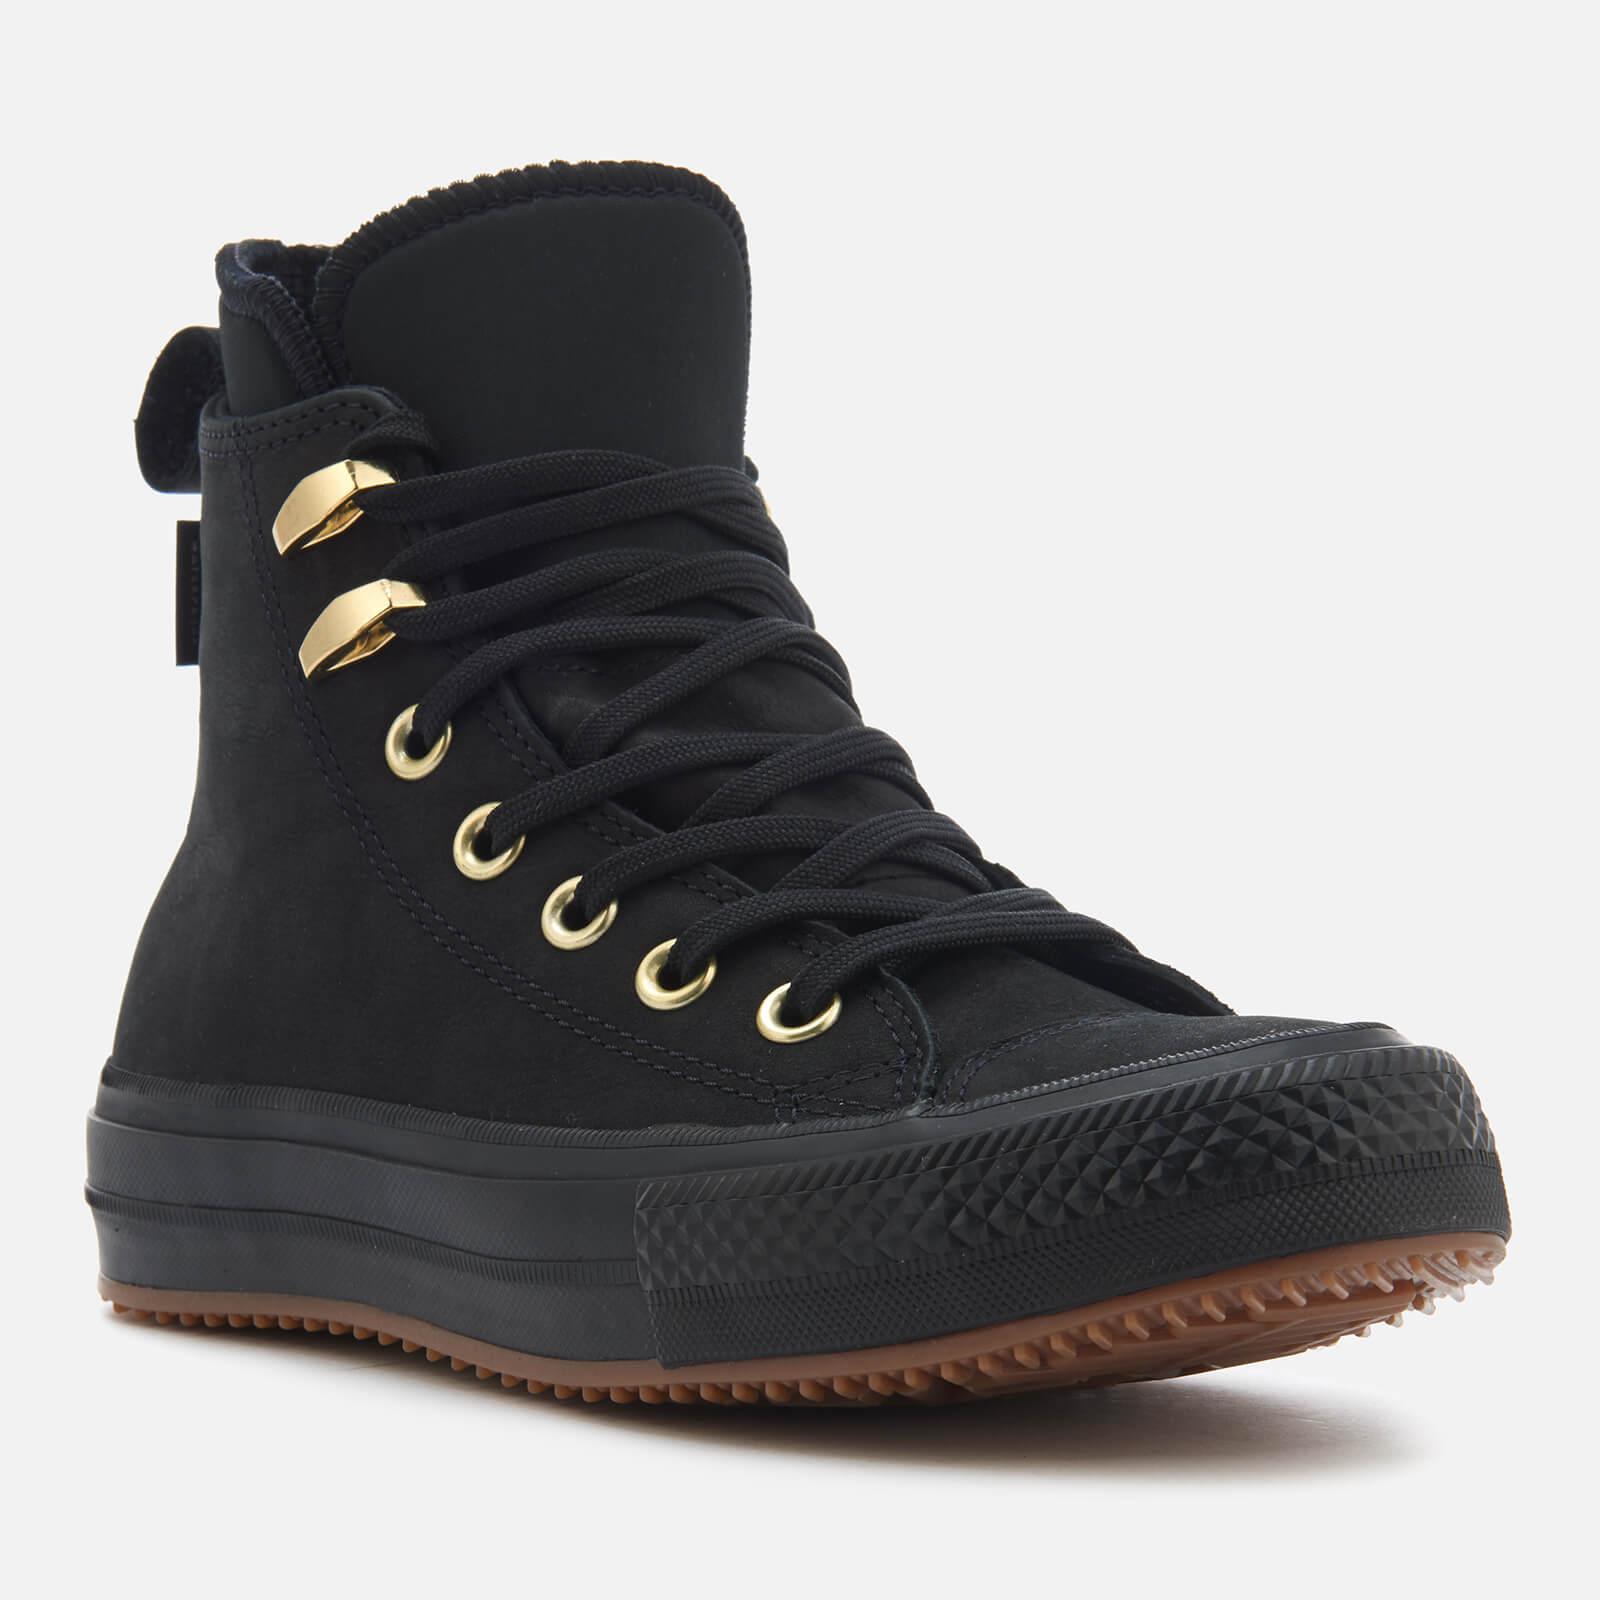 Converse Rubber Chuck Taylor All Star Waterproof Boots in Black - Lyst